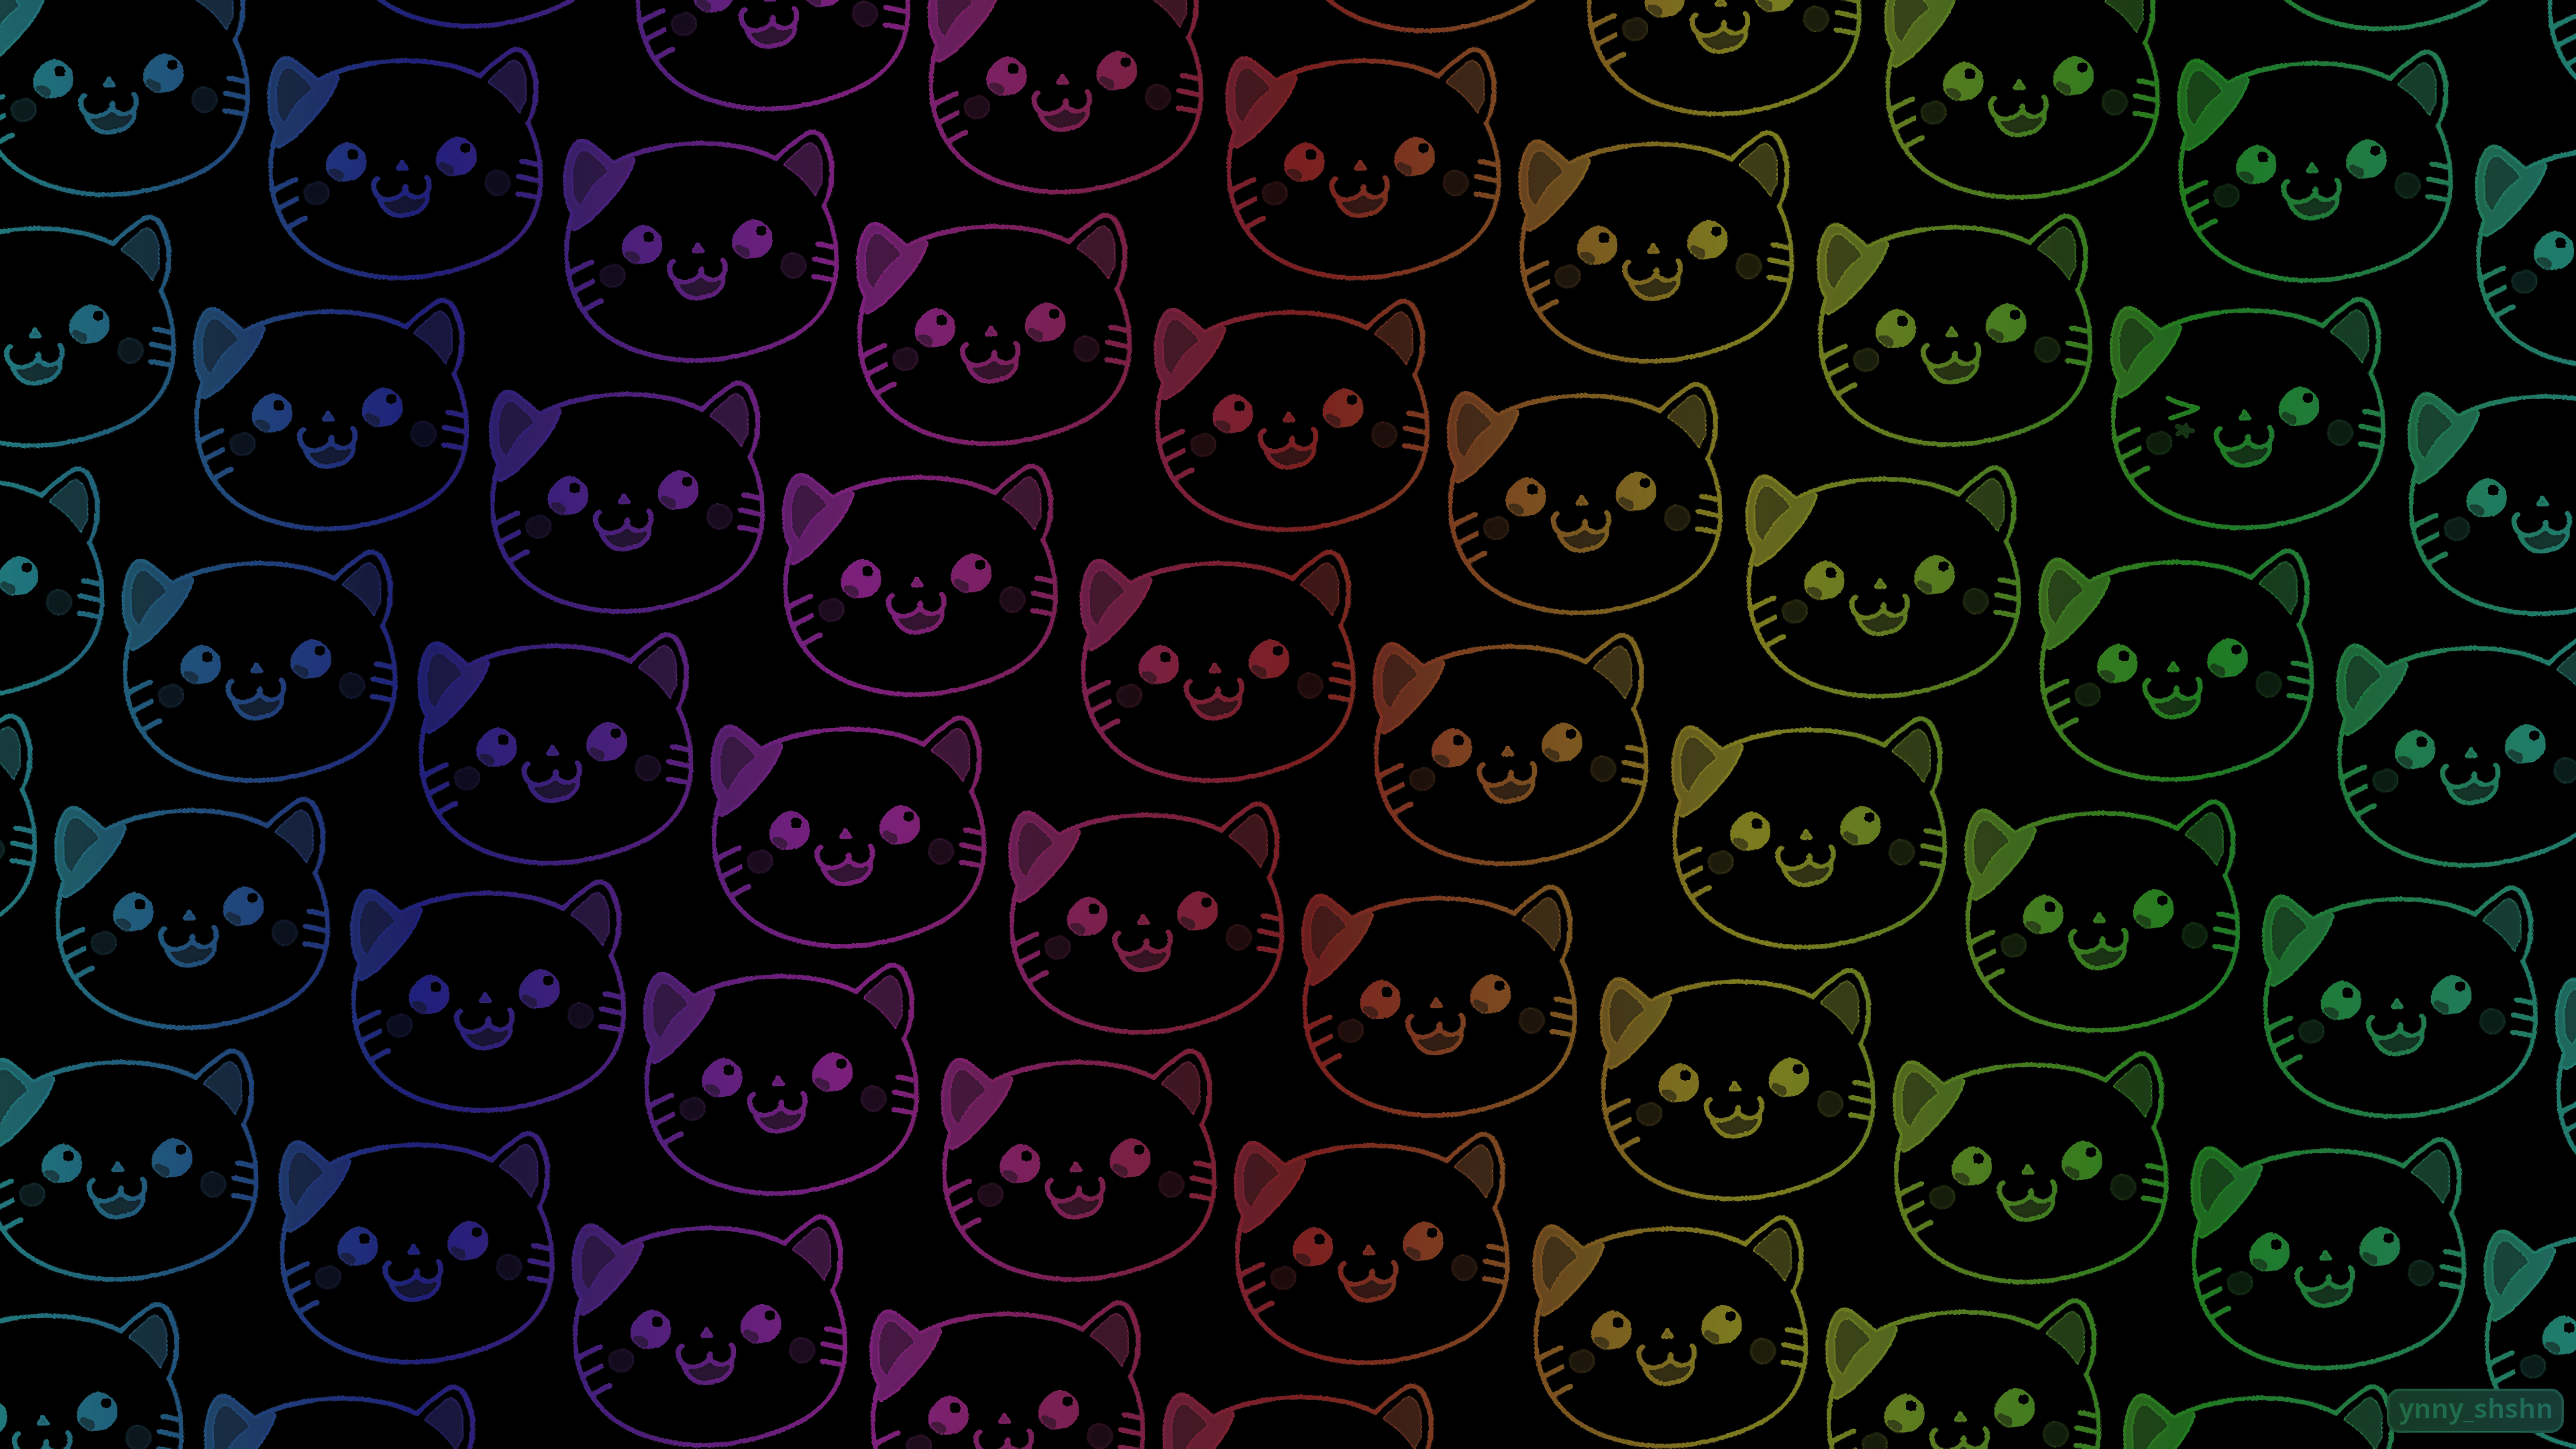 General 3840x2160 black background colorful dark cats